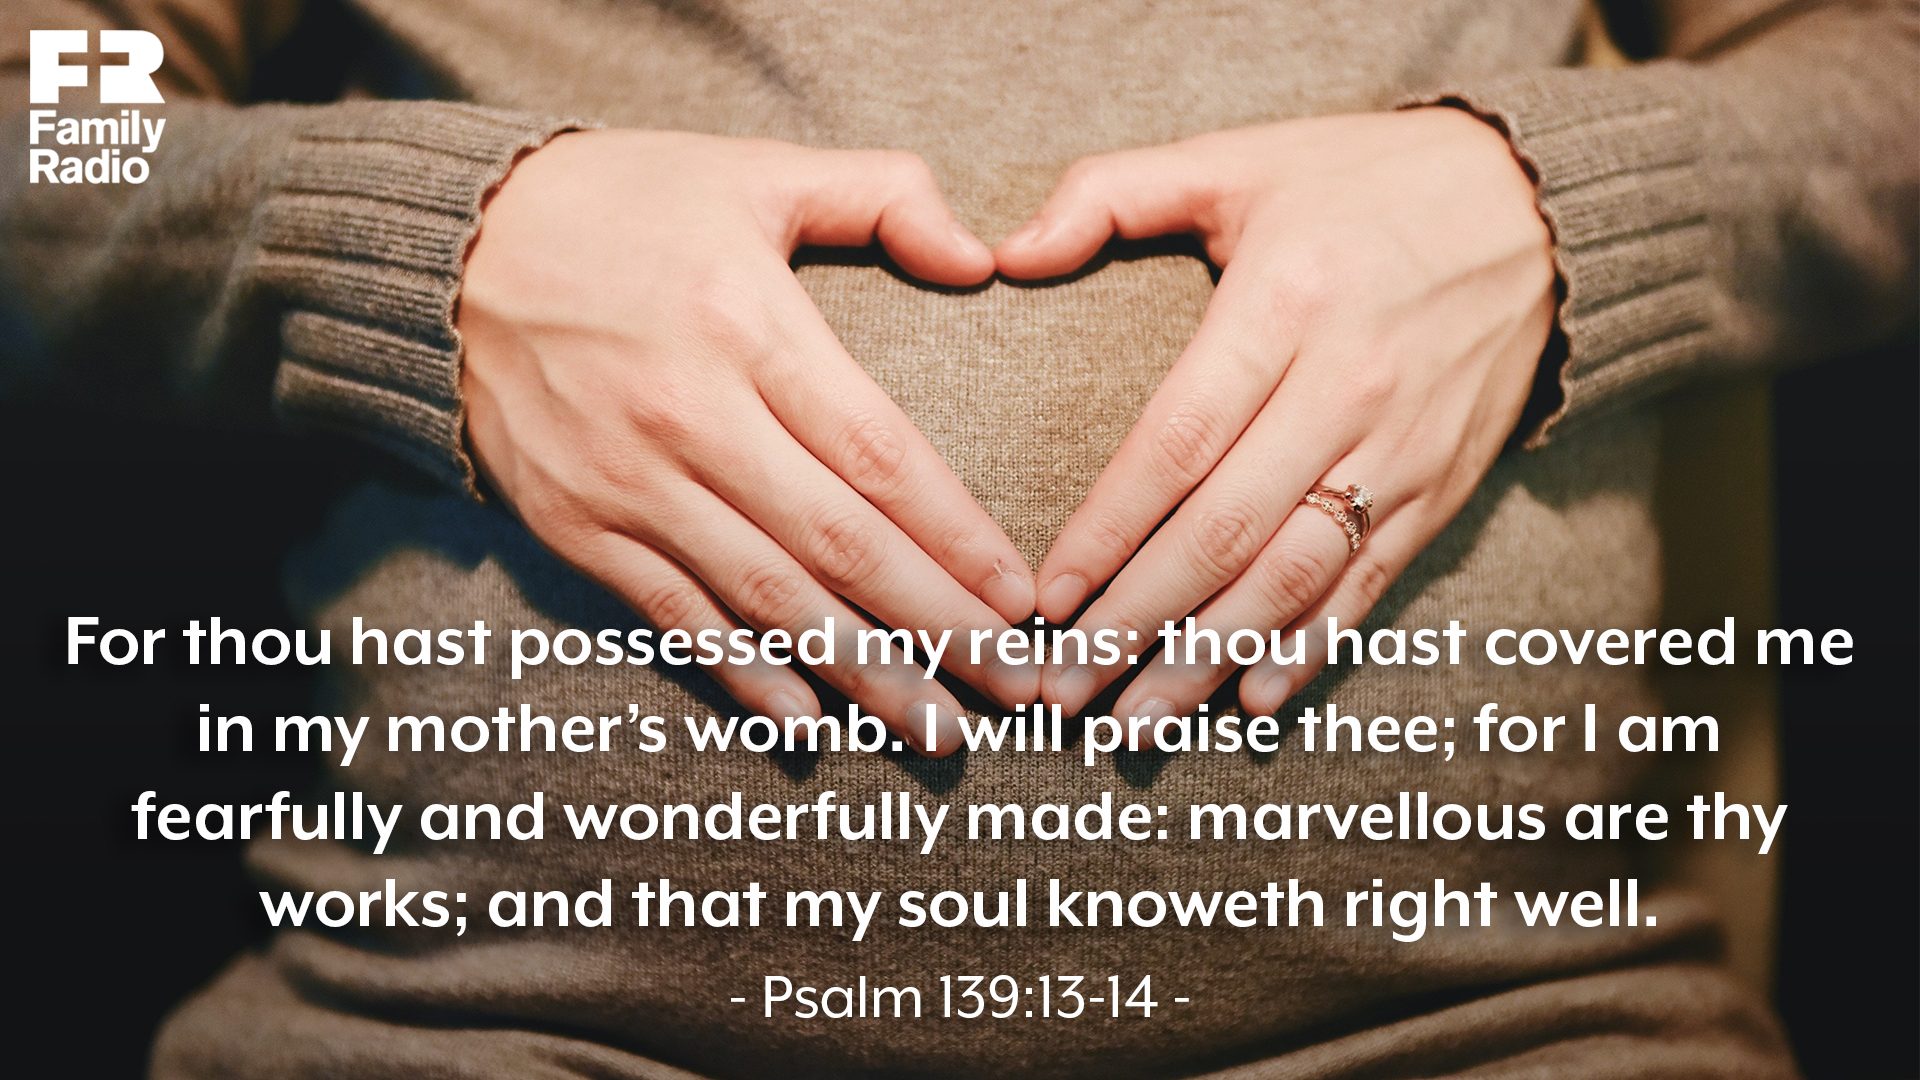 "For thou hast possessed my reins: thou hast covered me in my mother's womb. I will praise thee; for I am fearfully and wonderfully made: marvellous are thy works; and that my soul knoweth right well."